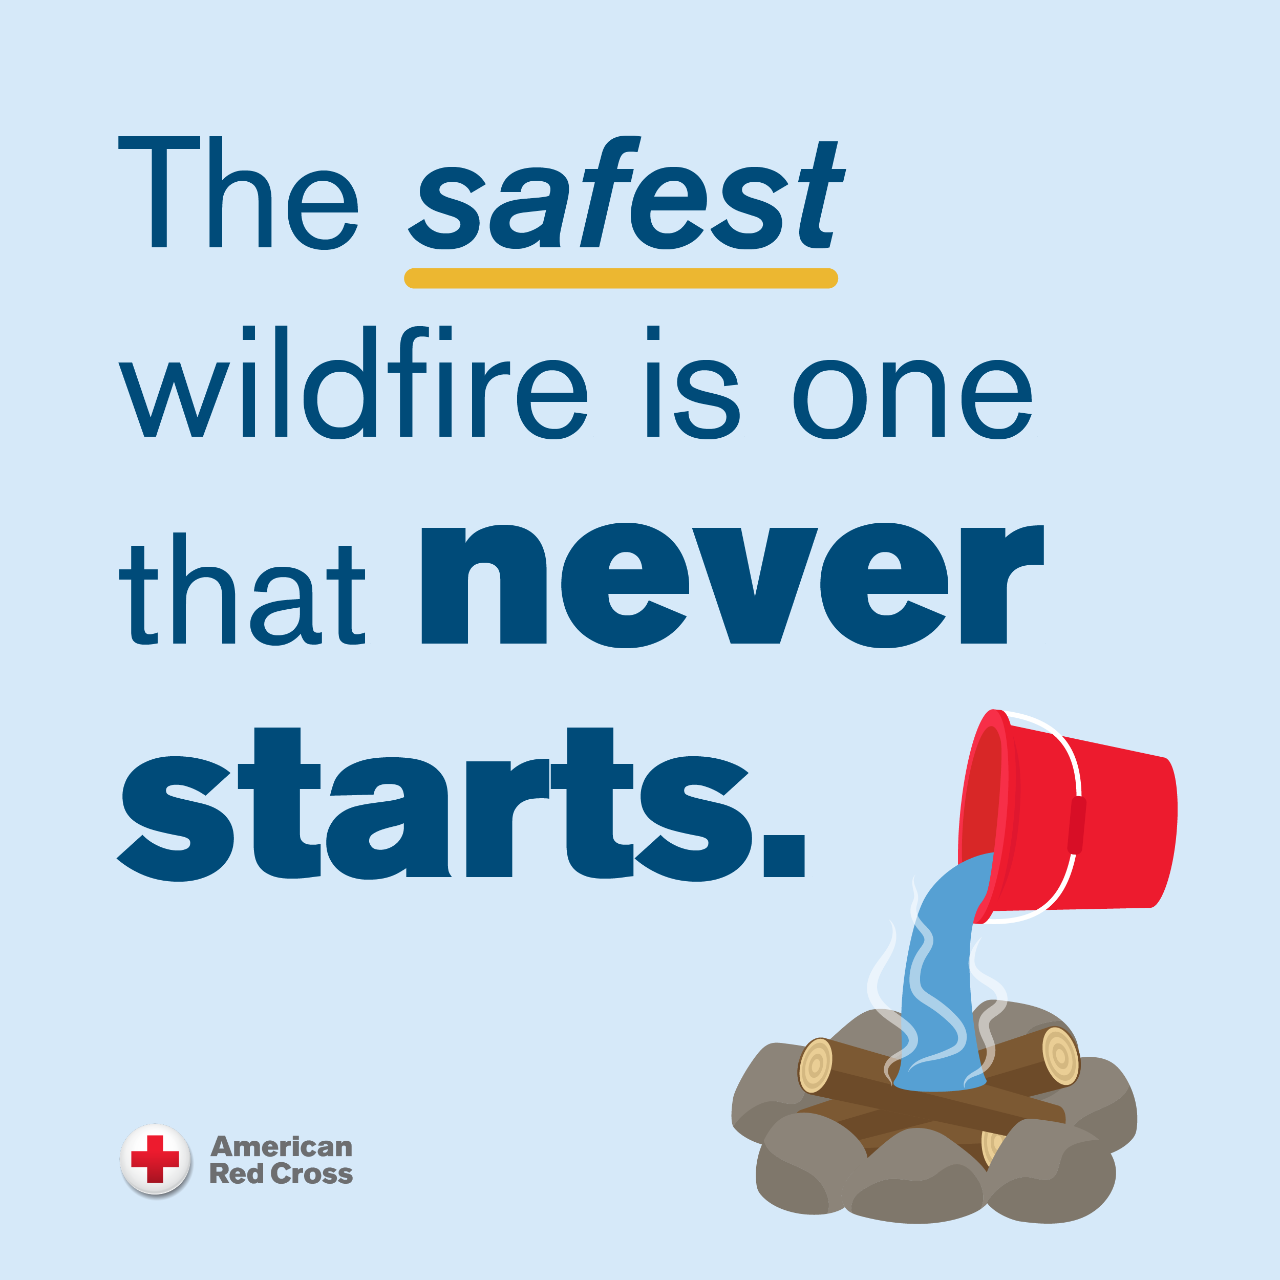 The safest wildfire is the one that doesn't start